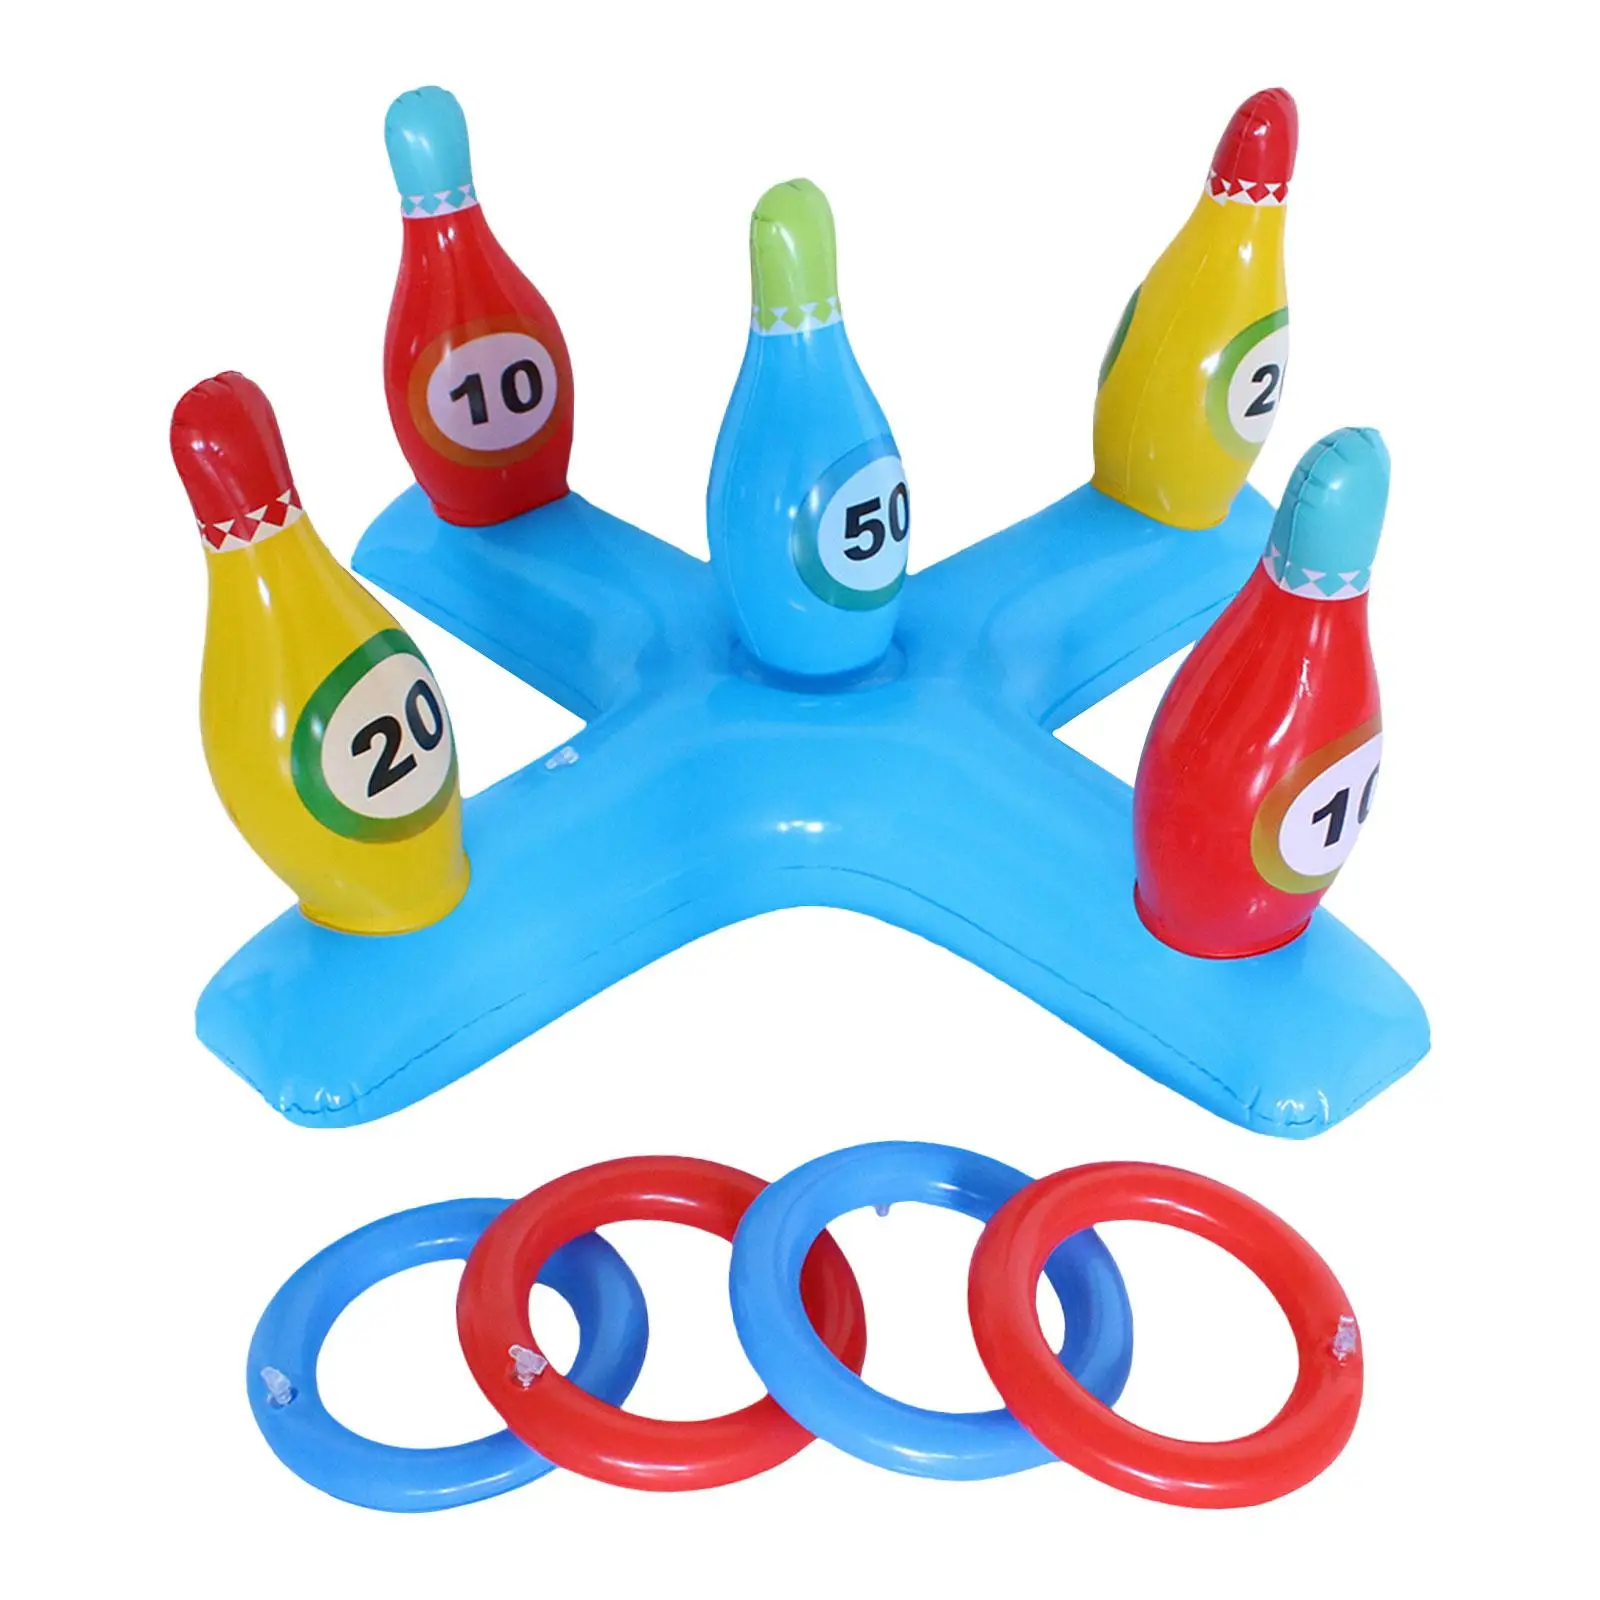 Ring Toss Game Set Durable Colorful Family Fun Activities Carnival Outdoor Games for Activity Xmas Carnival Backyard Adults